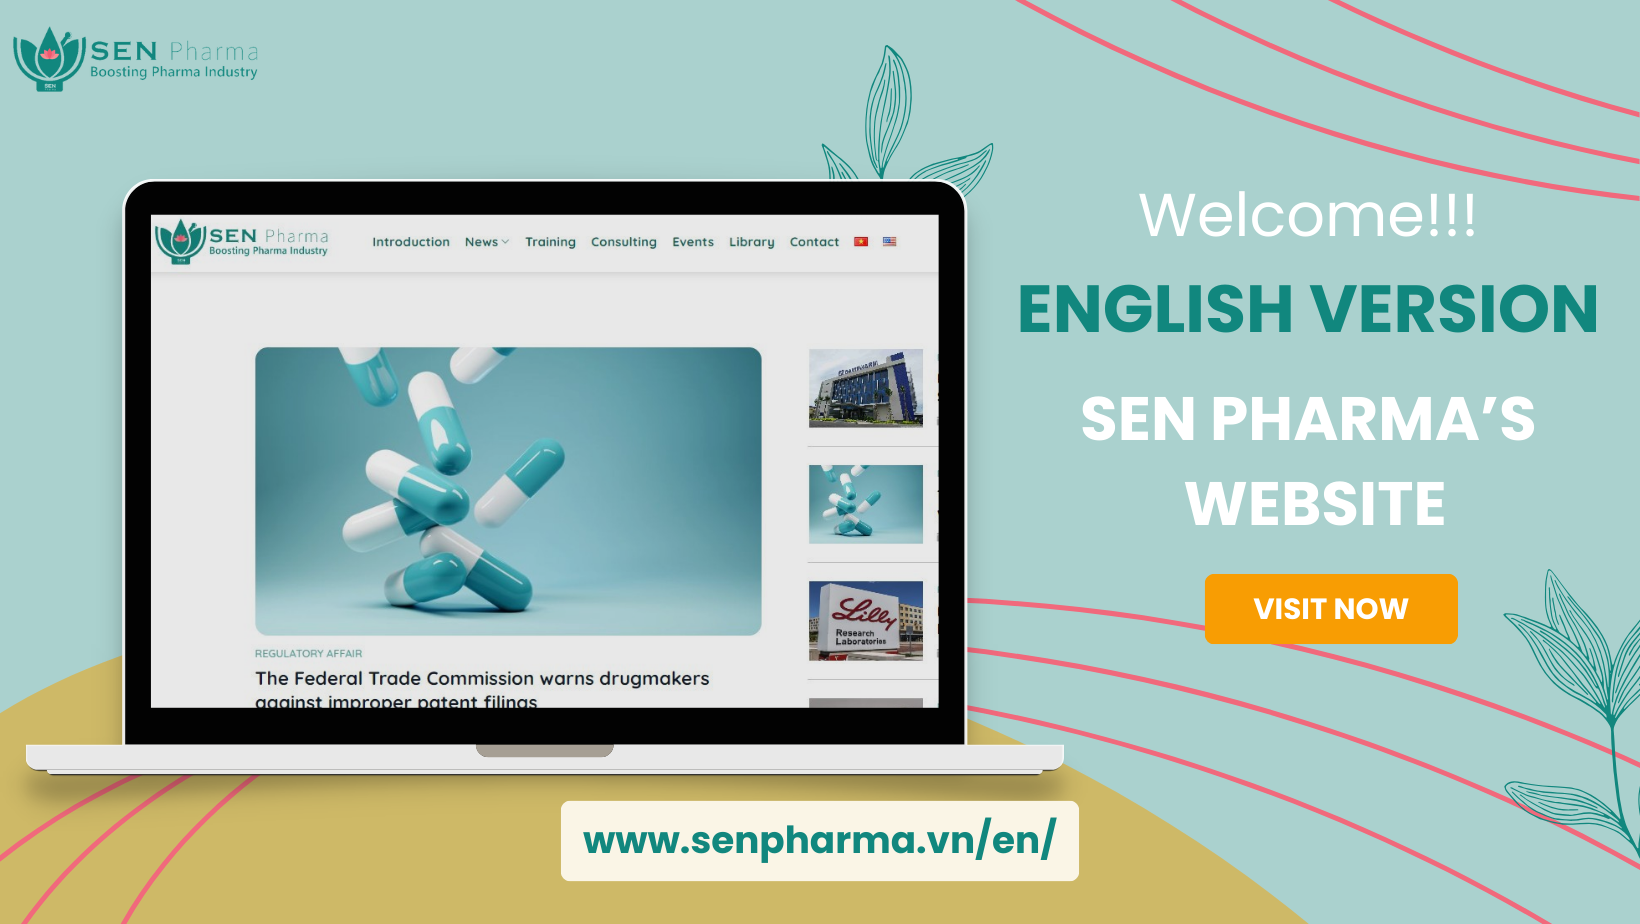 The English version of SEN Pharma's website is now available